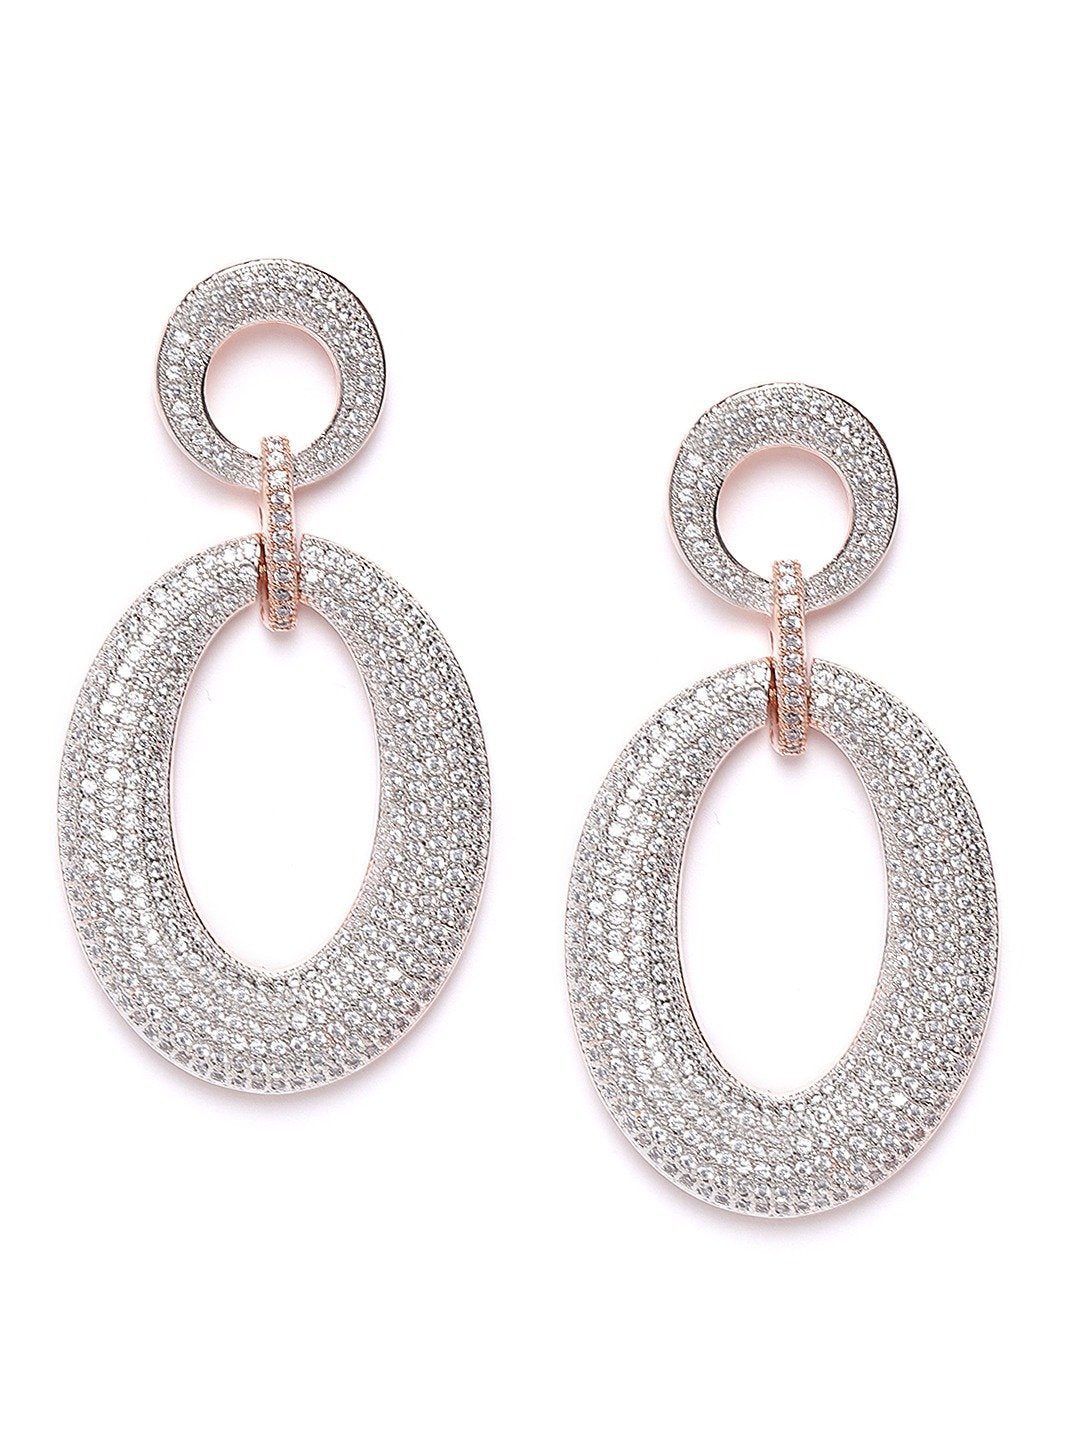 Beautuful Stone Studded Drop Earrings